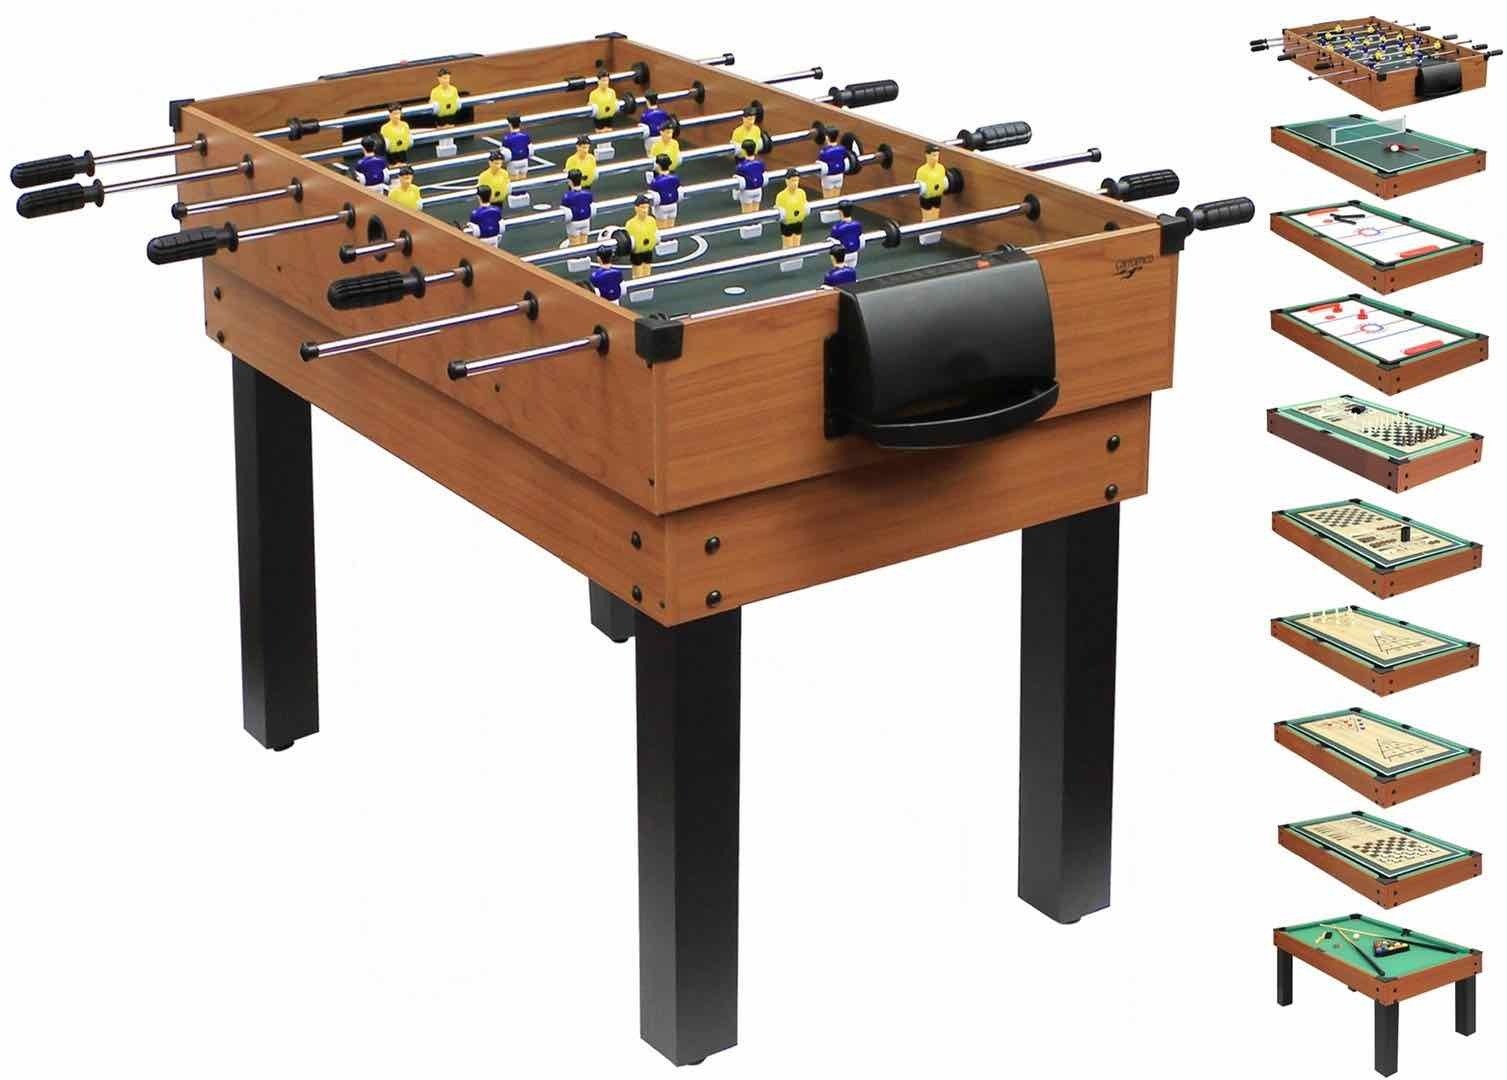 Carromco 10 in 1 game table with 10 different game bases